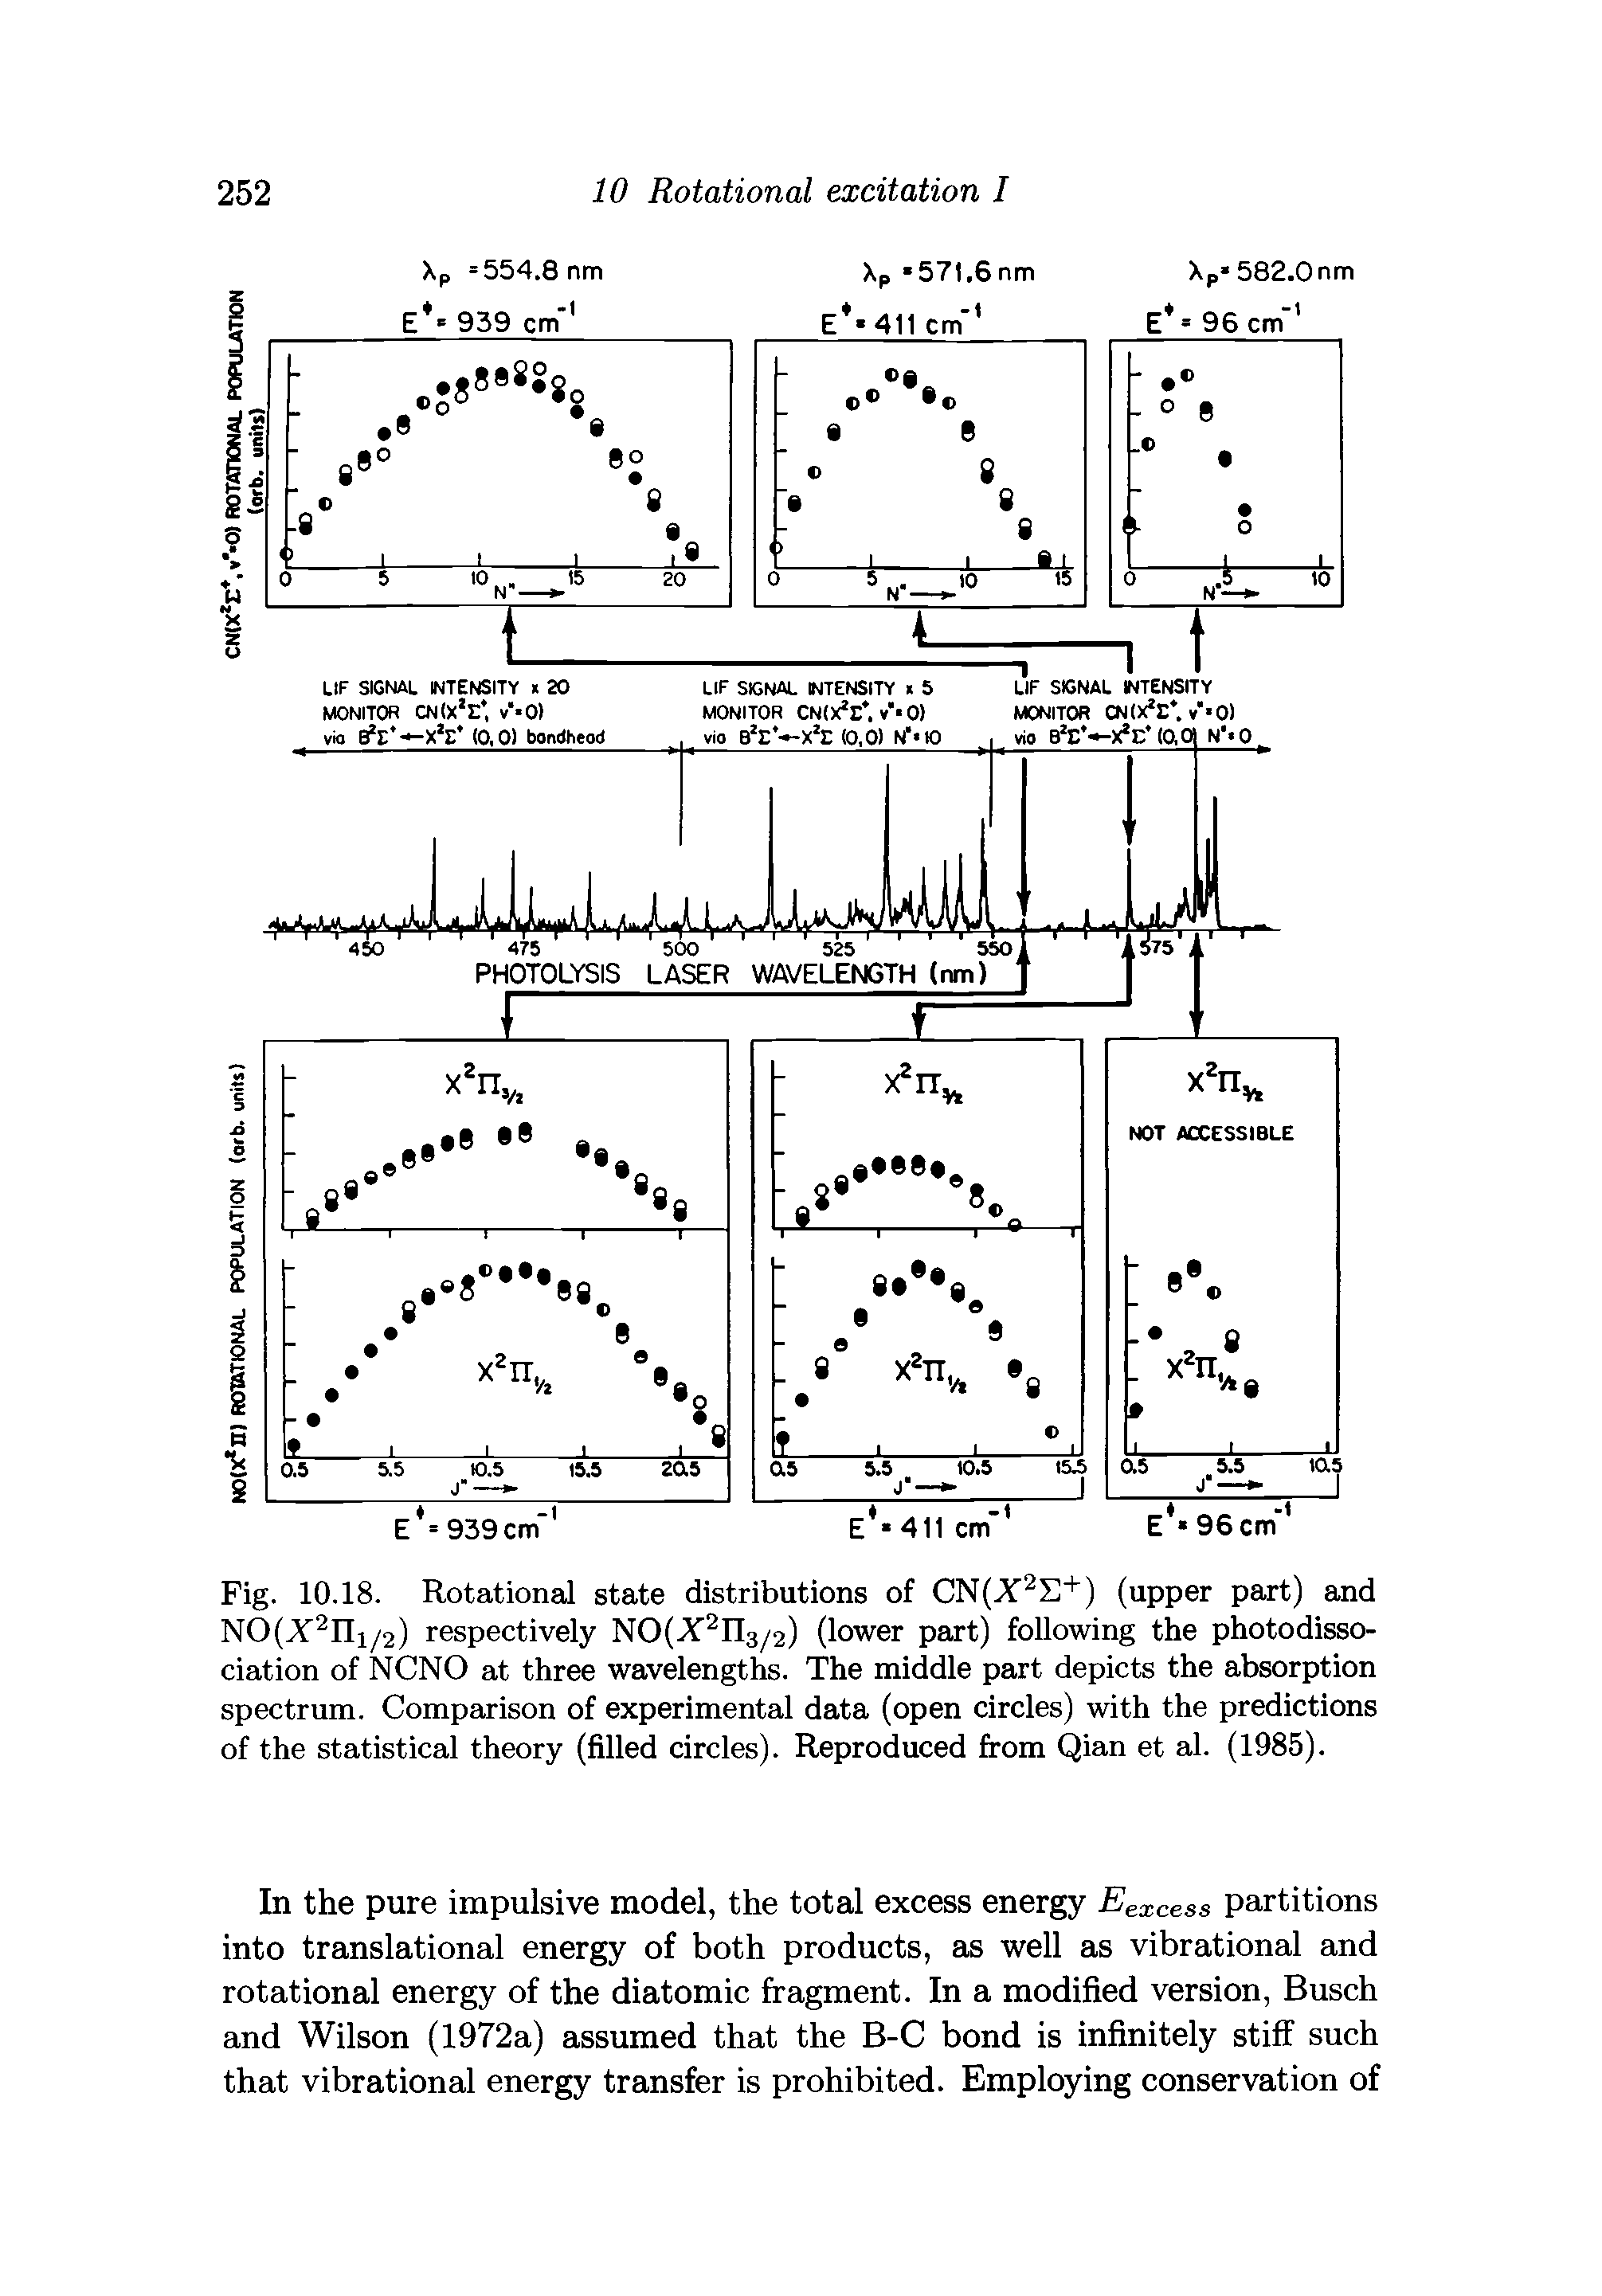 Fig. 10.18. Rotational state distributions of CN(X2E+) (upper part) and NO(X2IIi/2) respectively NO(X2n3/2) (lower part) following the photodissociation of NCNO at three wavelengths. The middle part depicts the absorption spectrum. Comparison of experimental data (open circles) with the predictions of the statistical theory (filled circles). Reproduced from Qian et al. (1985).